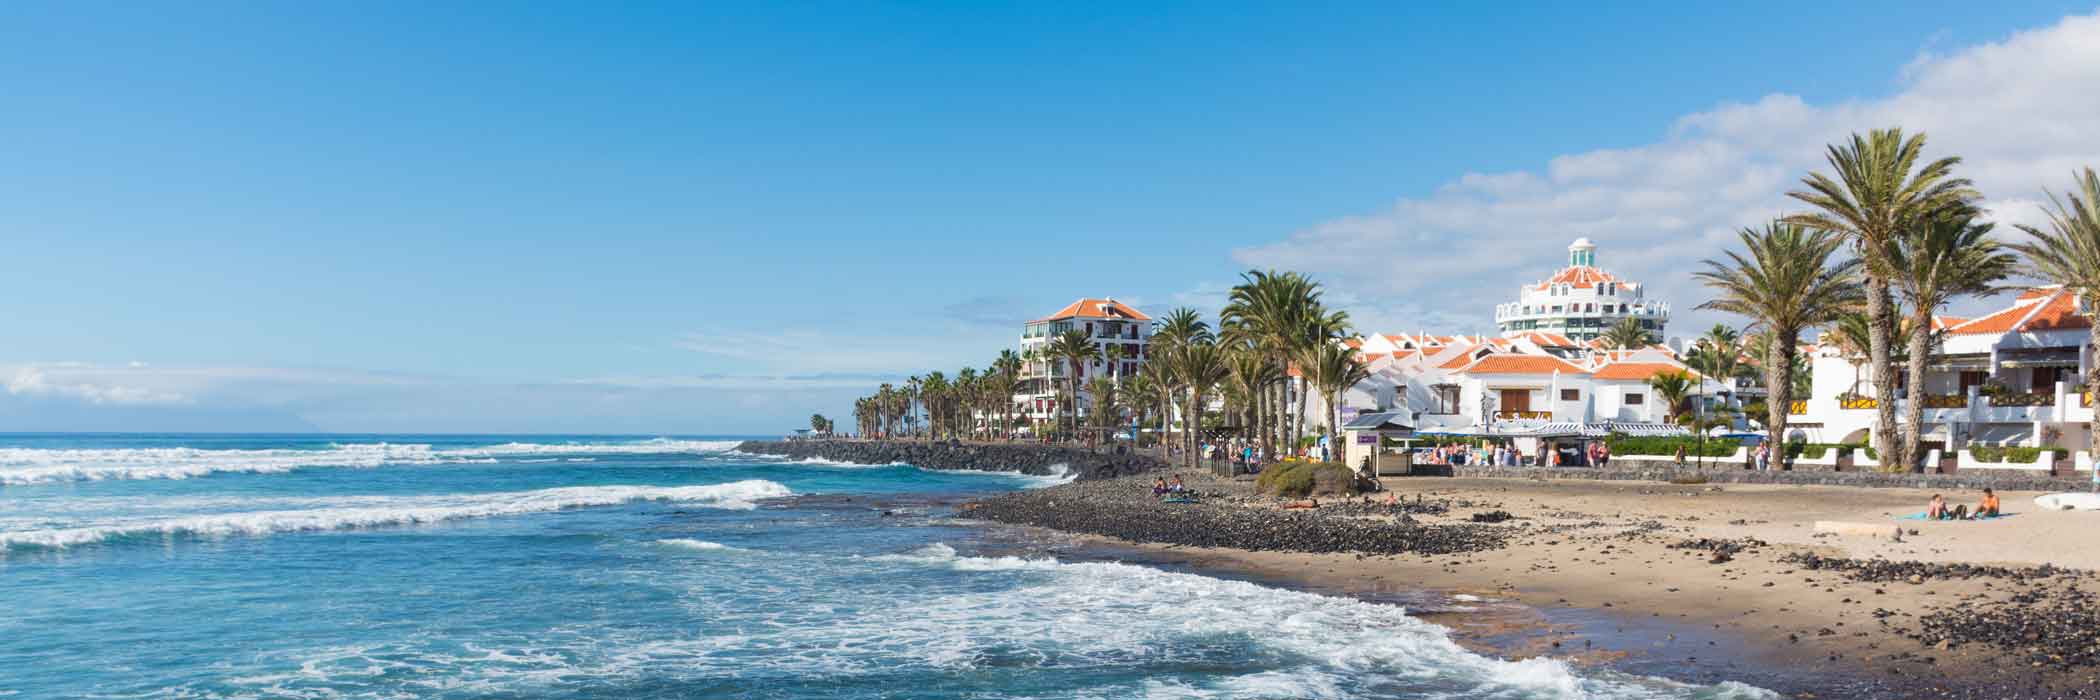 All inclusive holidays in Tenerife